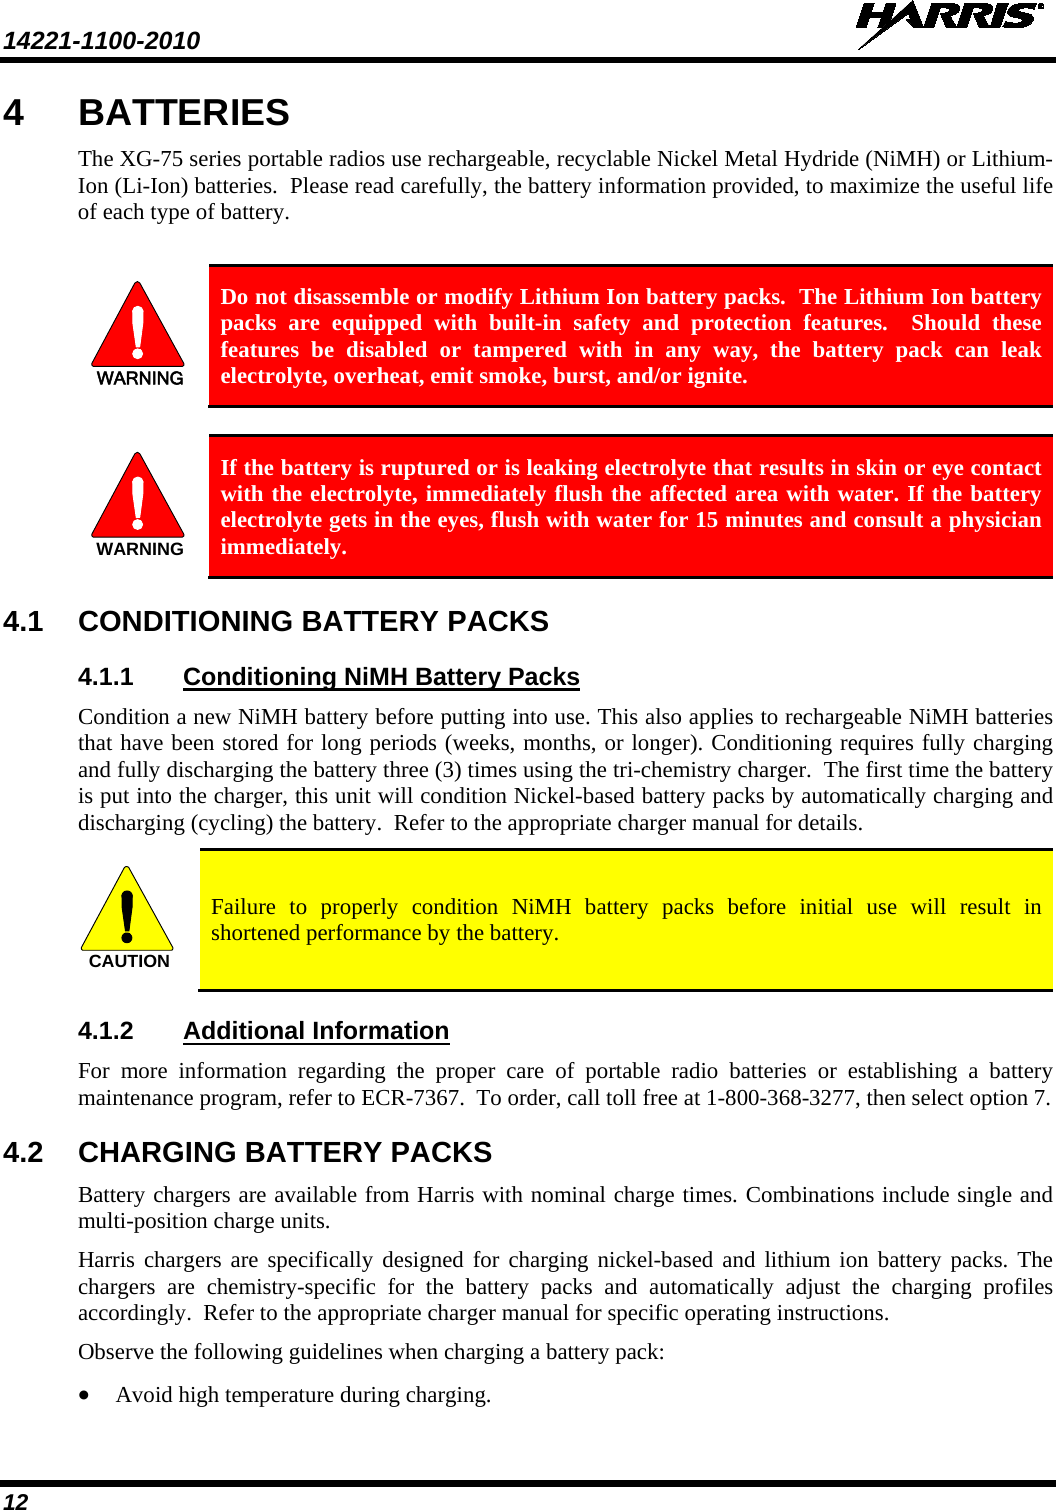 14221-1100-2010   12 4  BATTERIES The XG-75 series portable radios use rechargeable, recyclable Nickel Metal Hydride (NiMH) or Lithium-Ion (Li-Ion) batteries.  Please read carefully, the battery information provided, to maximize the useful life of each type of battery.  WARNING Do not disassemble or modify Lithium Ion battery packs.  The Lithium Ion battery packs are equipped with built-in safety and protection features.  Should these features be disabled or tampered with in any way, the battery pack can leak electrolyte, overheat, emit smoke, burst, and/or ignite.  WARNING If the battery is ruptured or is leaking electrolyte that results in skin or eye contact with the electrolyte, immediately flush the affected area with water. If the battery electrolyte gets in the eyes, flush with water for 15 minutes and consult a physician immediately. 4.1 CONDITIONING BATTERY PACKS 4.1.1 Conditioning NiMH Battery Packs Condition a new NiMH battery before putting into use. This also applies to rechargeable NiMH batteries that have been stored for long periods (weeks, months, or longer). Conditioning requires fully charging and fully discharging the battery three (3) times using the tri-chemistry charger.  The first time the battery is put into the charger, this unit will condition Nickel-based battery packs by automatically charging and discharging (cycling) the battery.  Refer to the appropriate charger manual for details. CAUTION Failure to properly condition NiMH battery packs before initial use will result in shortened performance by the battery. 4.1.2 Additional Information For more information regarding the proper care of portable radio batteries or establishing a battery maintenance program, refer to ECR-7367.  To order, call toll free at 1-800-368-3277, then select option 7. 4.2 CHARGING BATTERY PACKS Battery chargers are available from Harris with nominal charge times. Combinations include single and multi-position charge units.  Harris chargers are specifically designed for charging nickel-based and lithium ion battery packs. The chargers are chemistry-specific for the battery packs and automatically adjust the charging profiles accordingly.  Refer to the appropriate charger manual for specific operating instructions.  Observe the following guidelines when charging a battery pack: • Avoid high temperature during charging.  